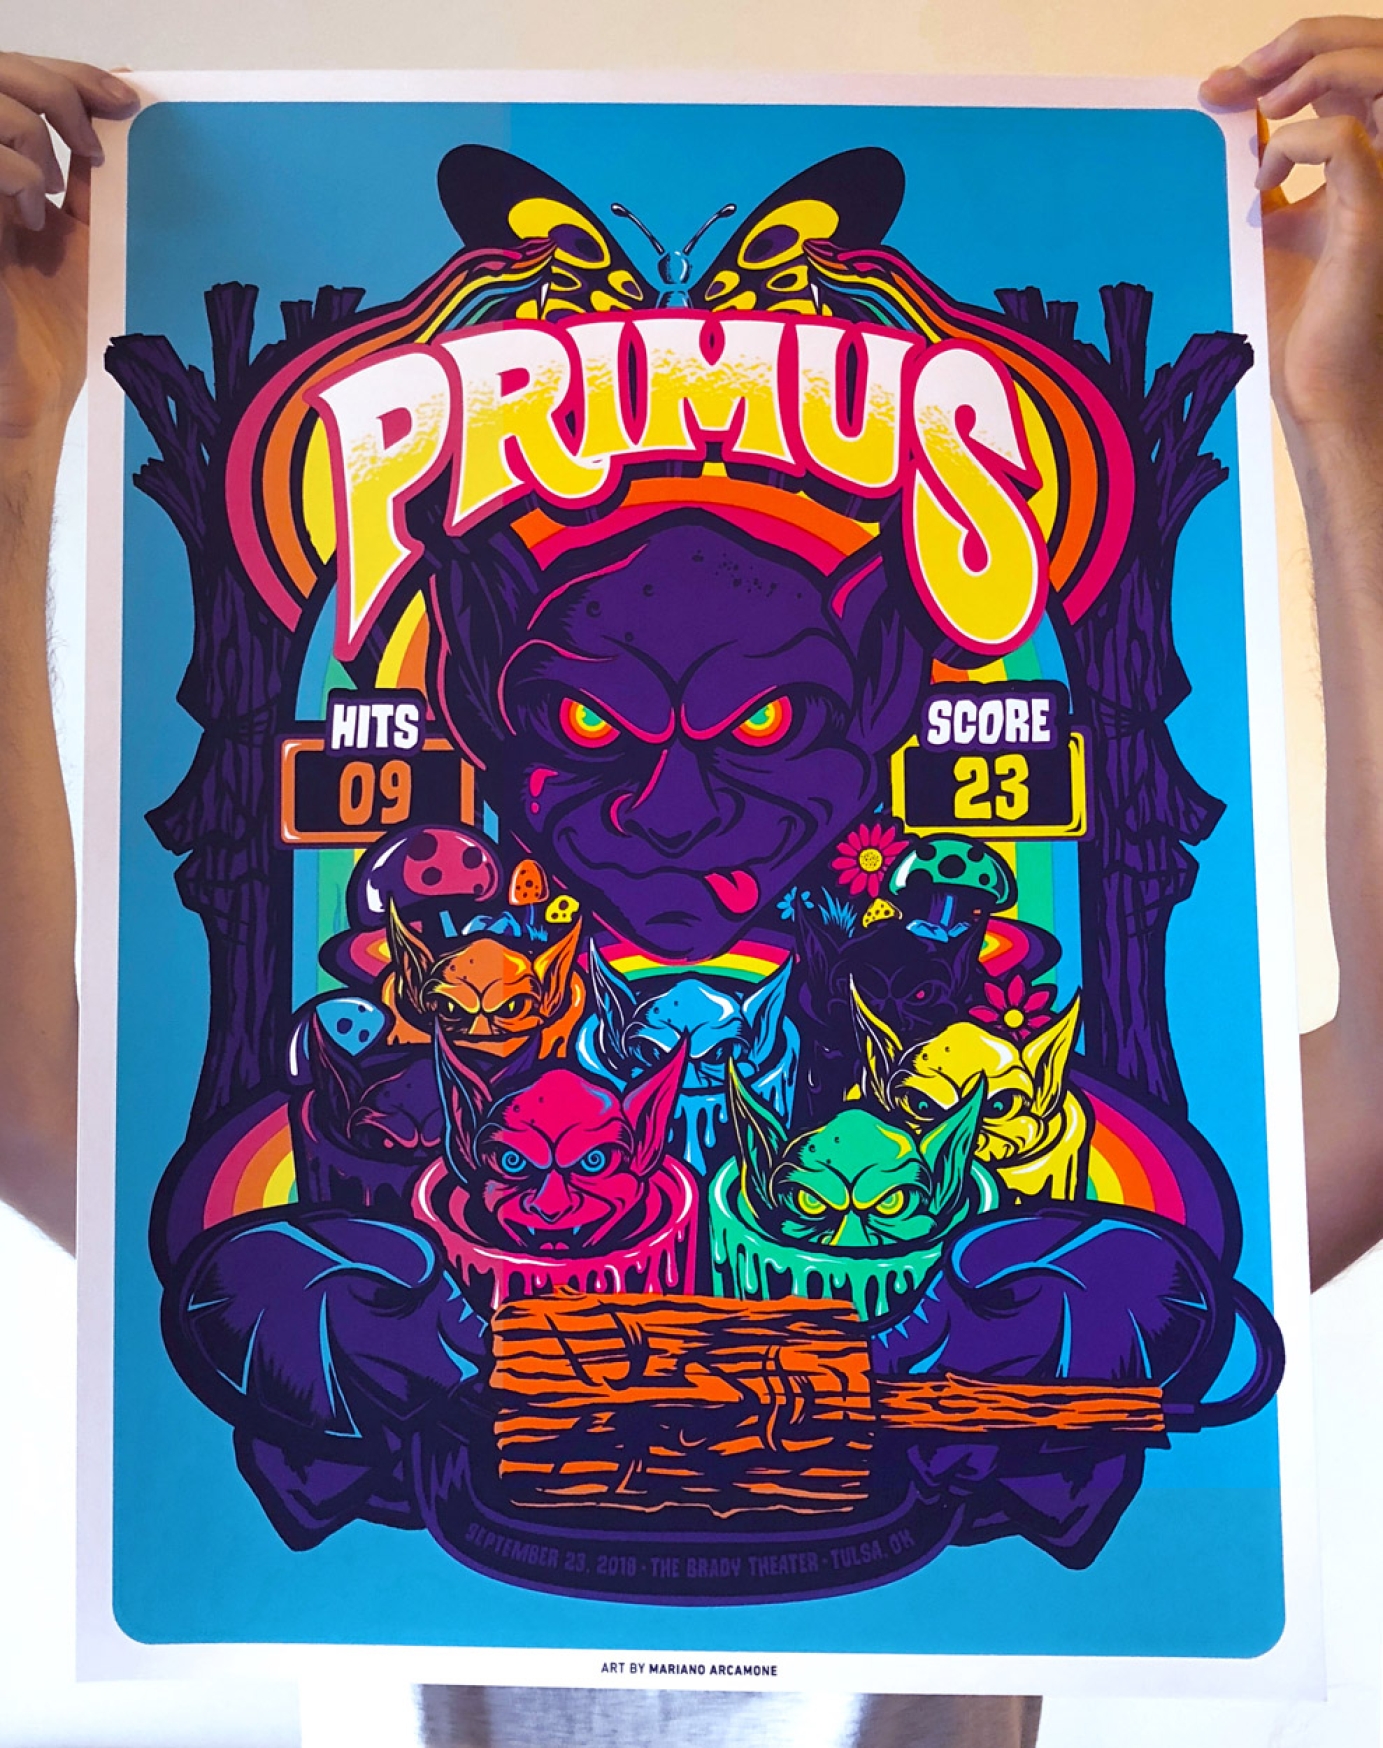 Merchandise for Primus by Mariano Arcamone